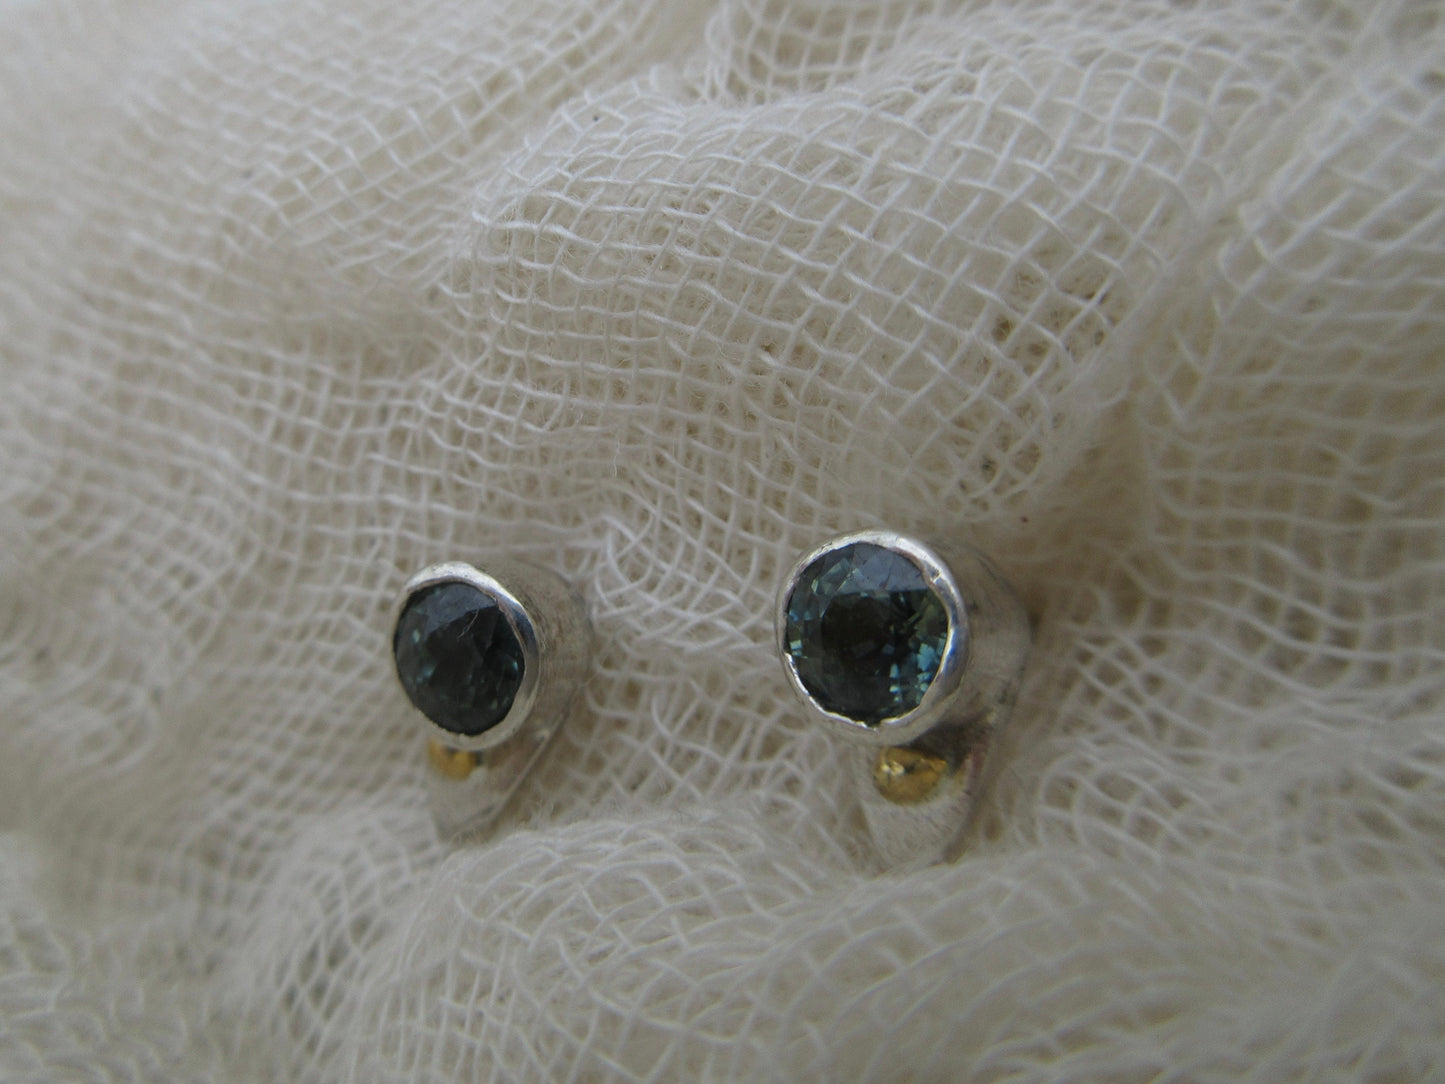 Sapphire stud earrings in argentium sterling silver and 24 karat gold